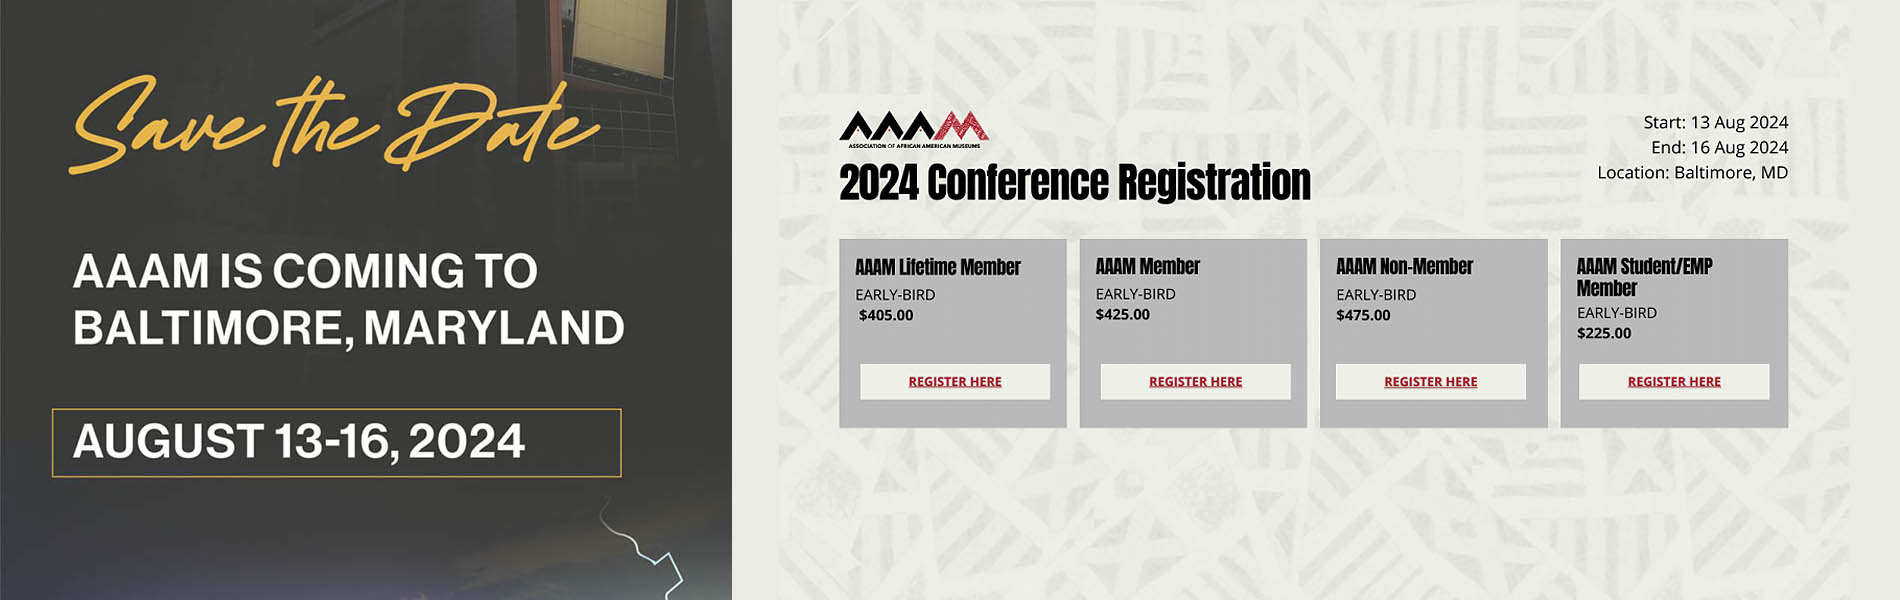 2024 AAAM conference registration